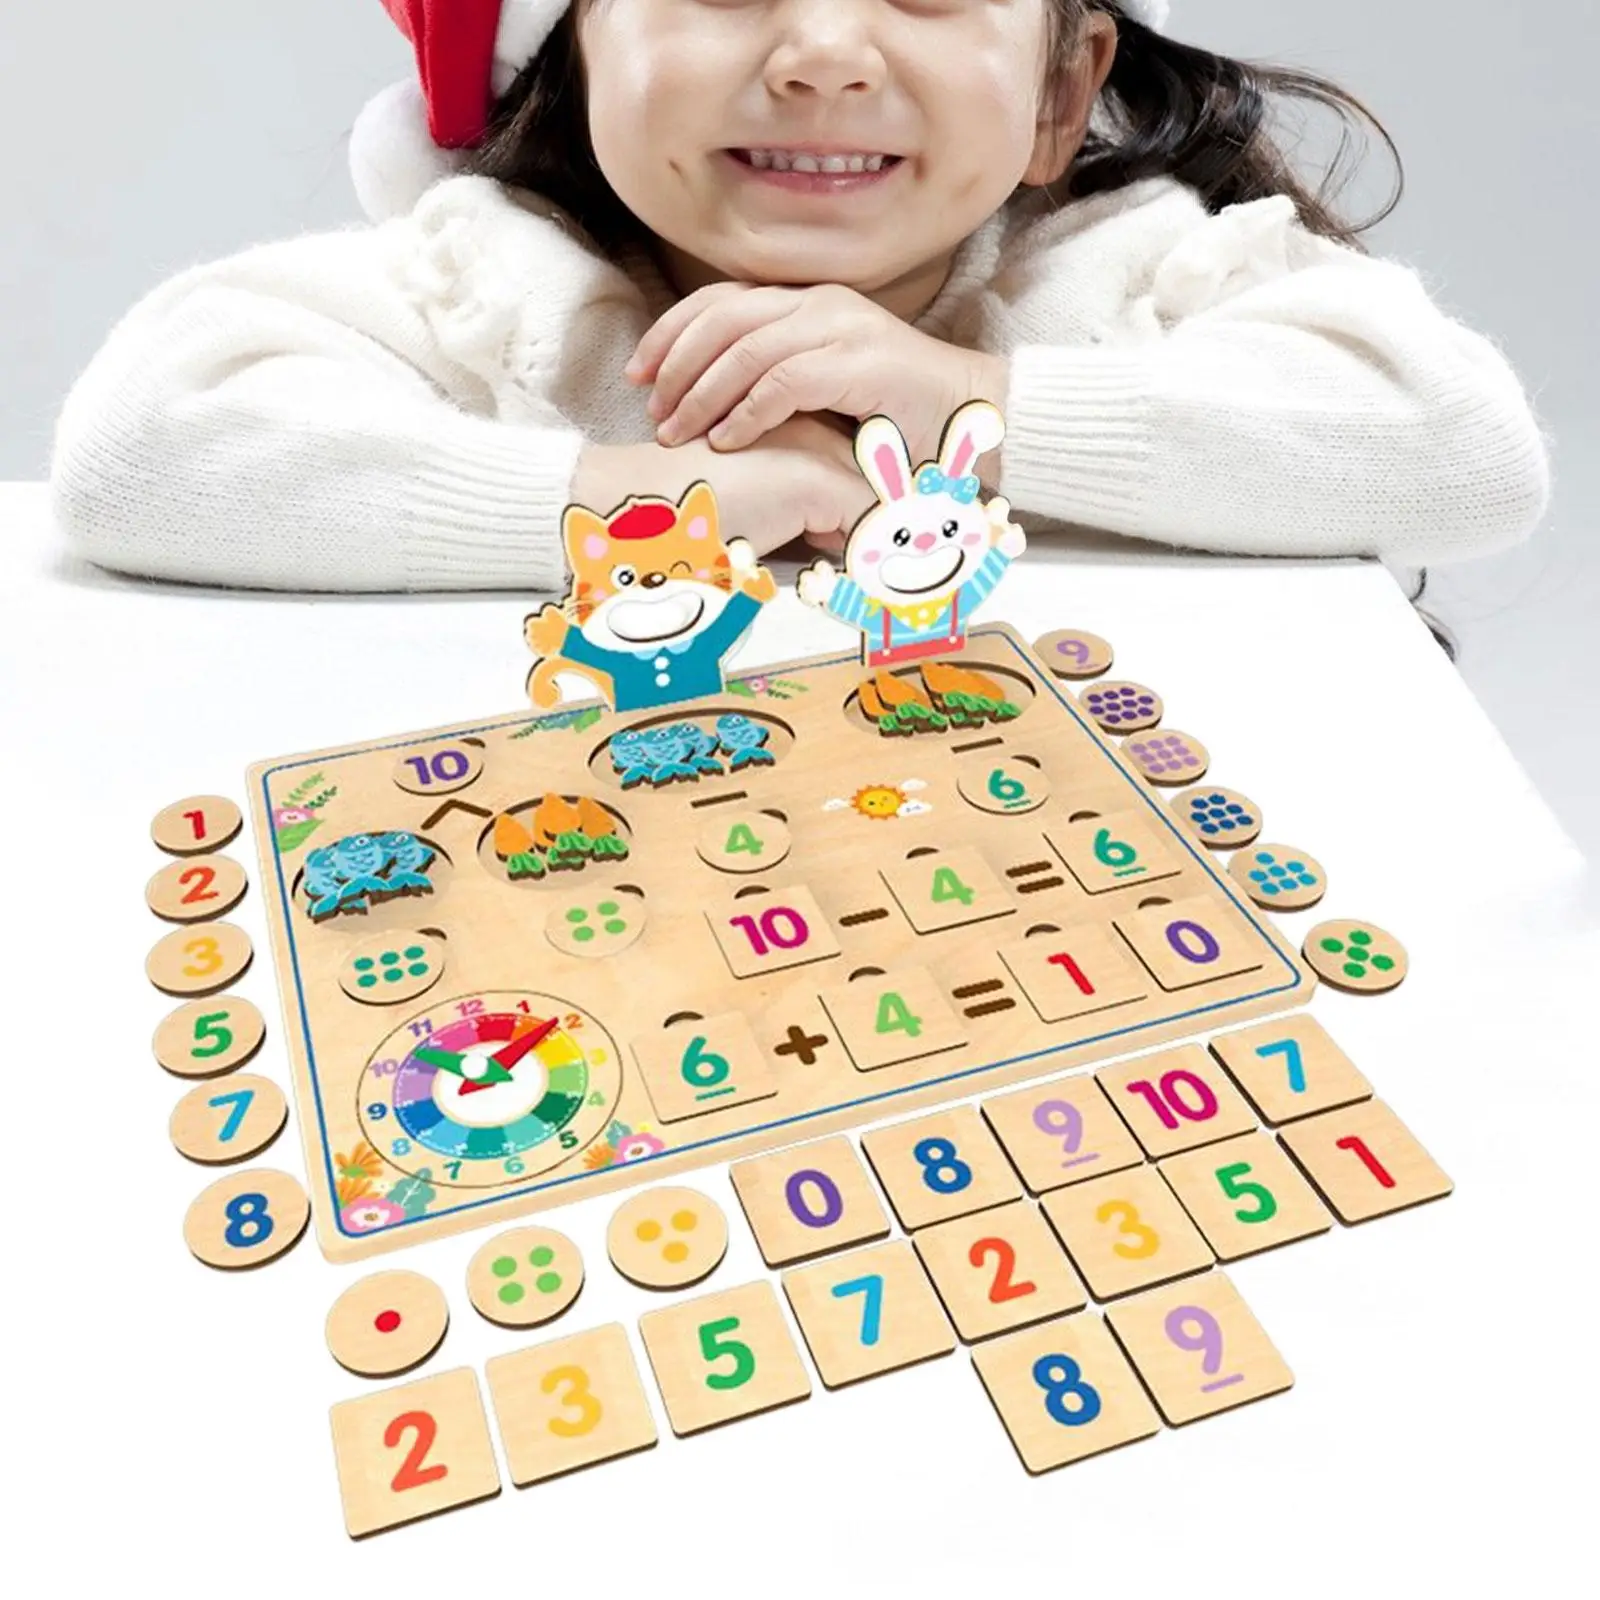 Wood Mathematical Learning Toy Calculation Board Made Premium Material